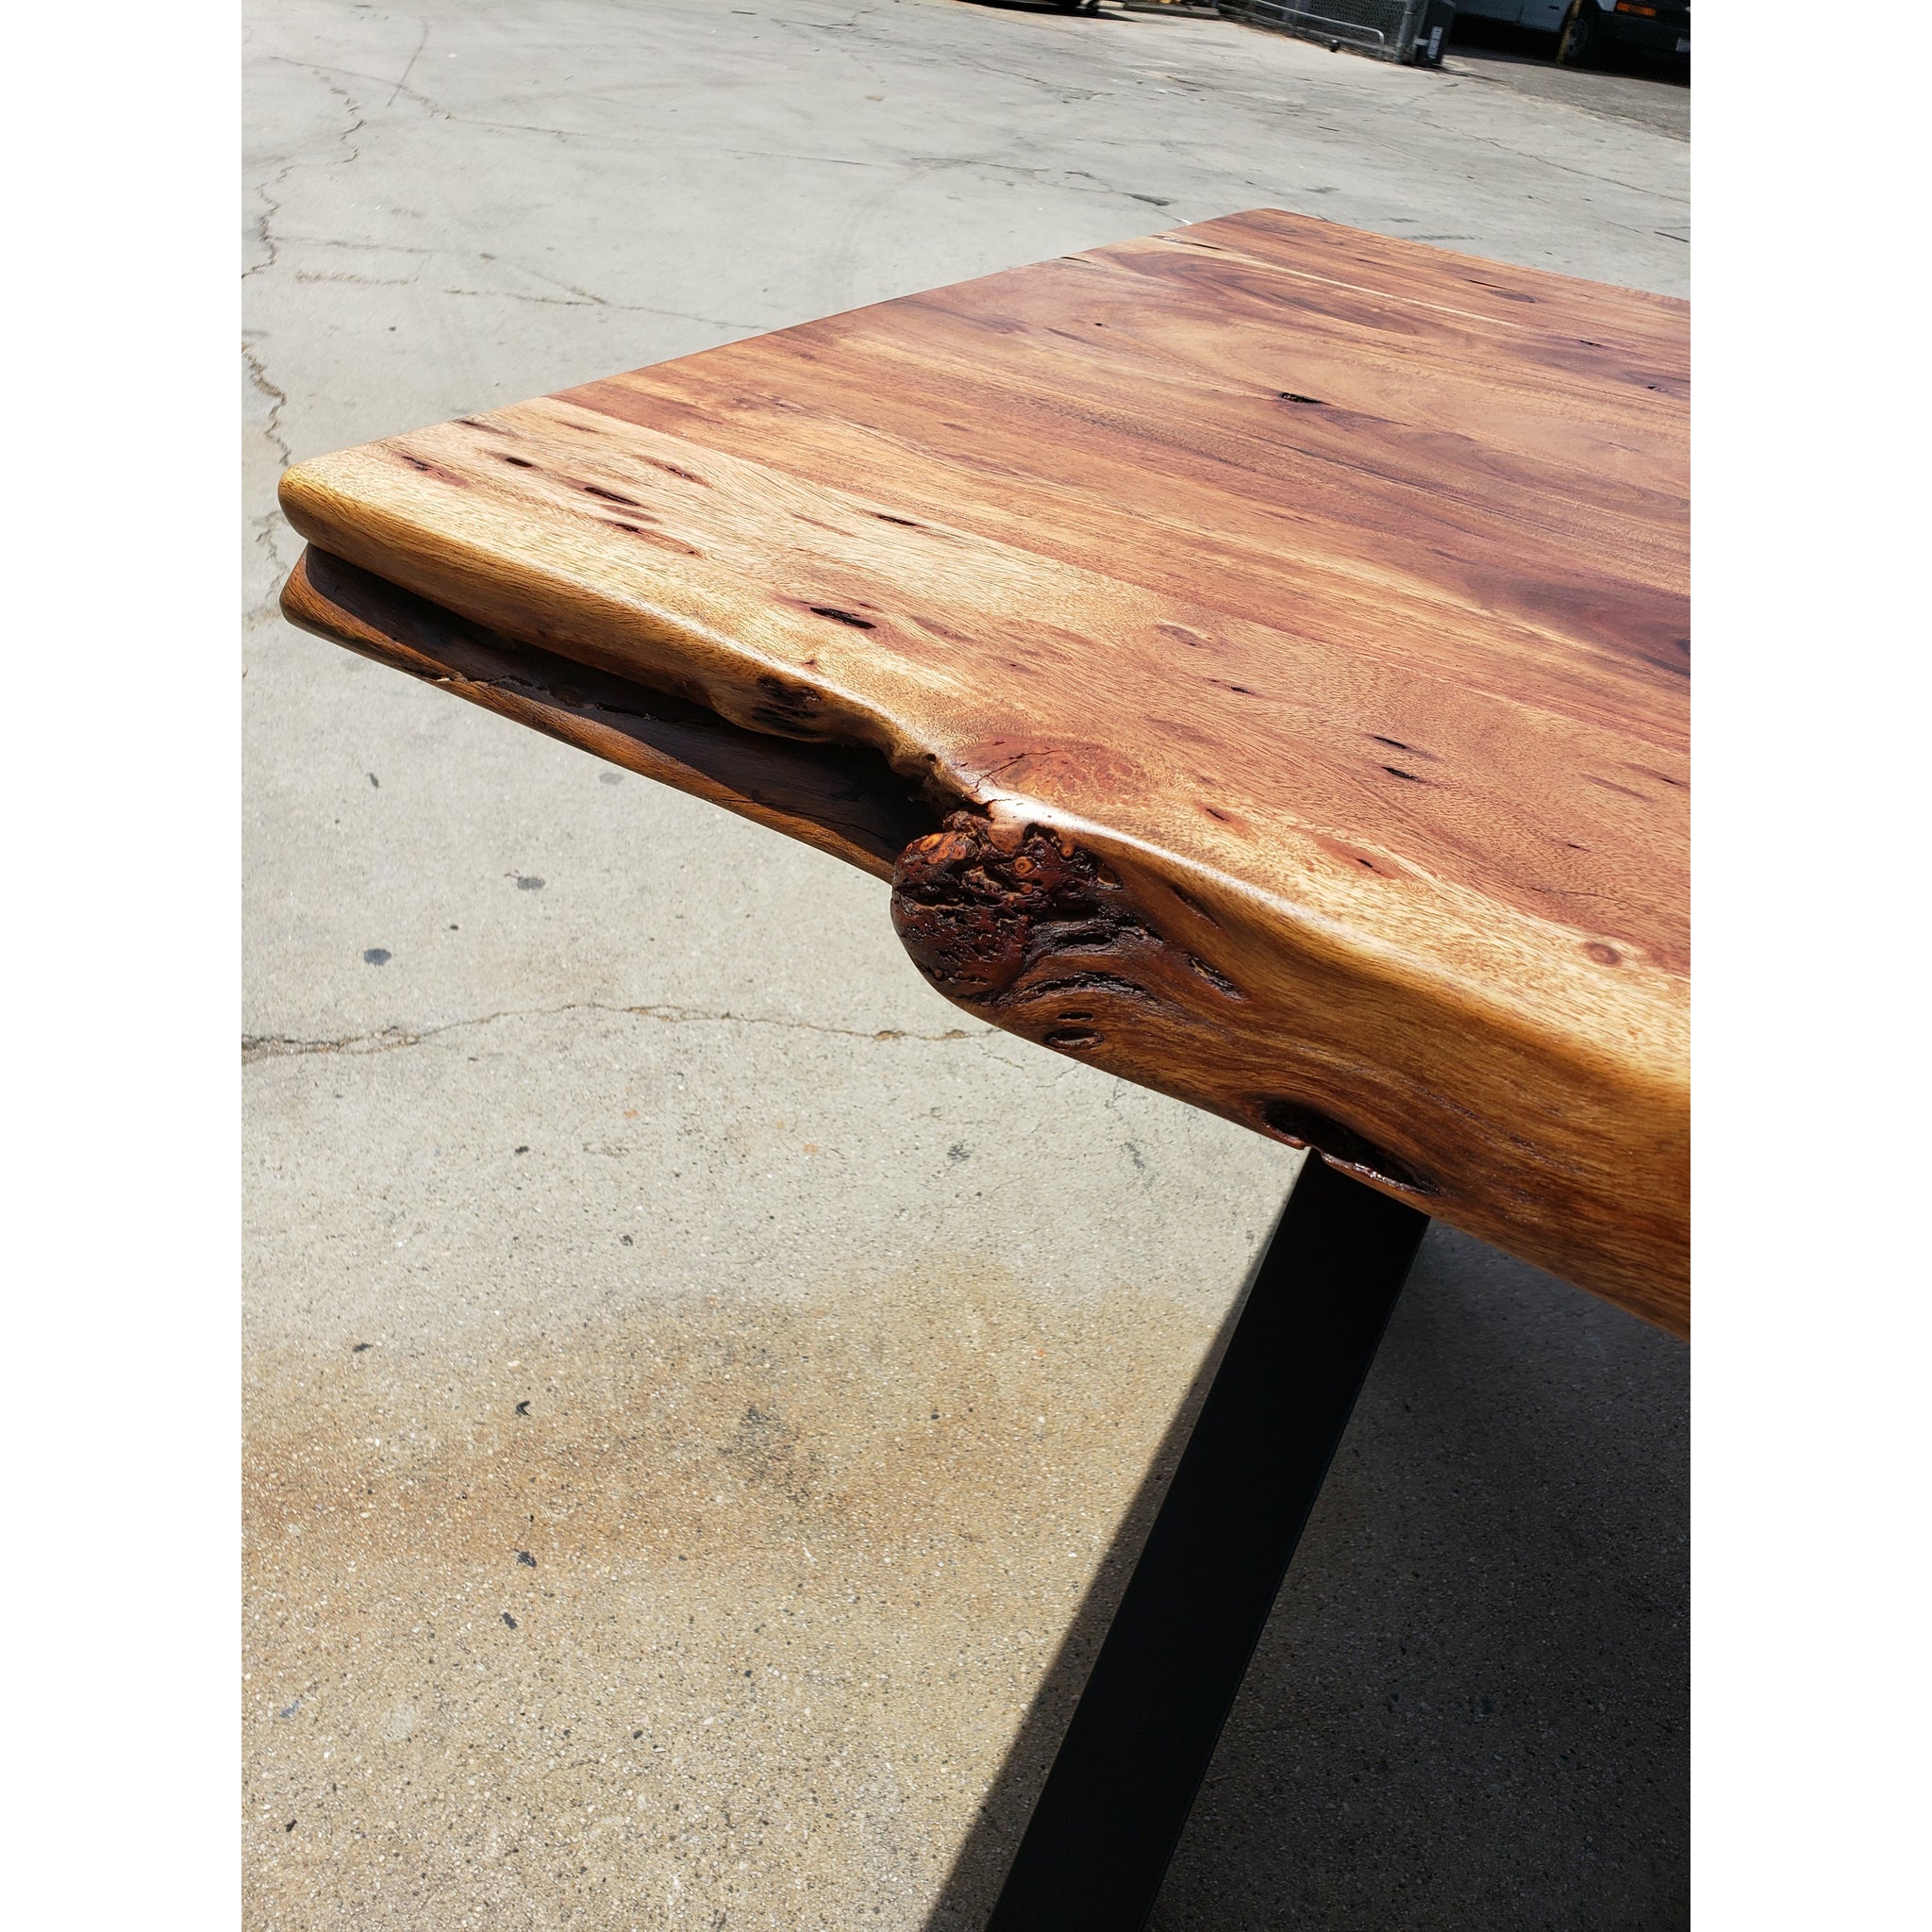 Finely Handcrafted, 96L Live Edge Acacia Wood Dining Table